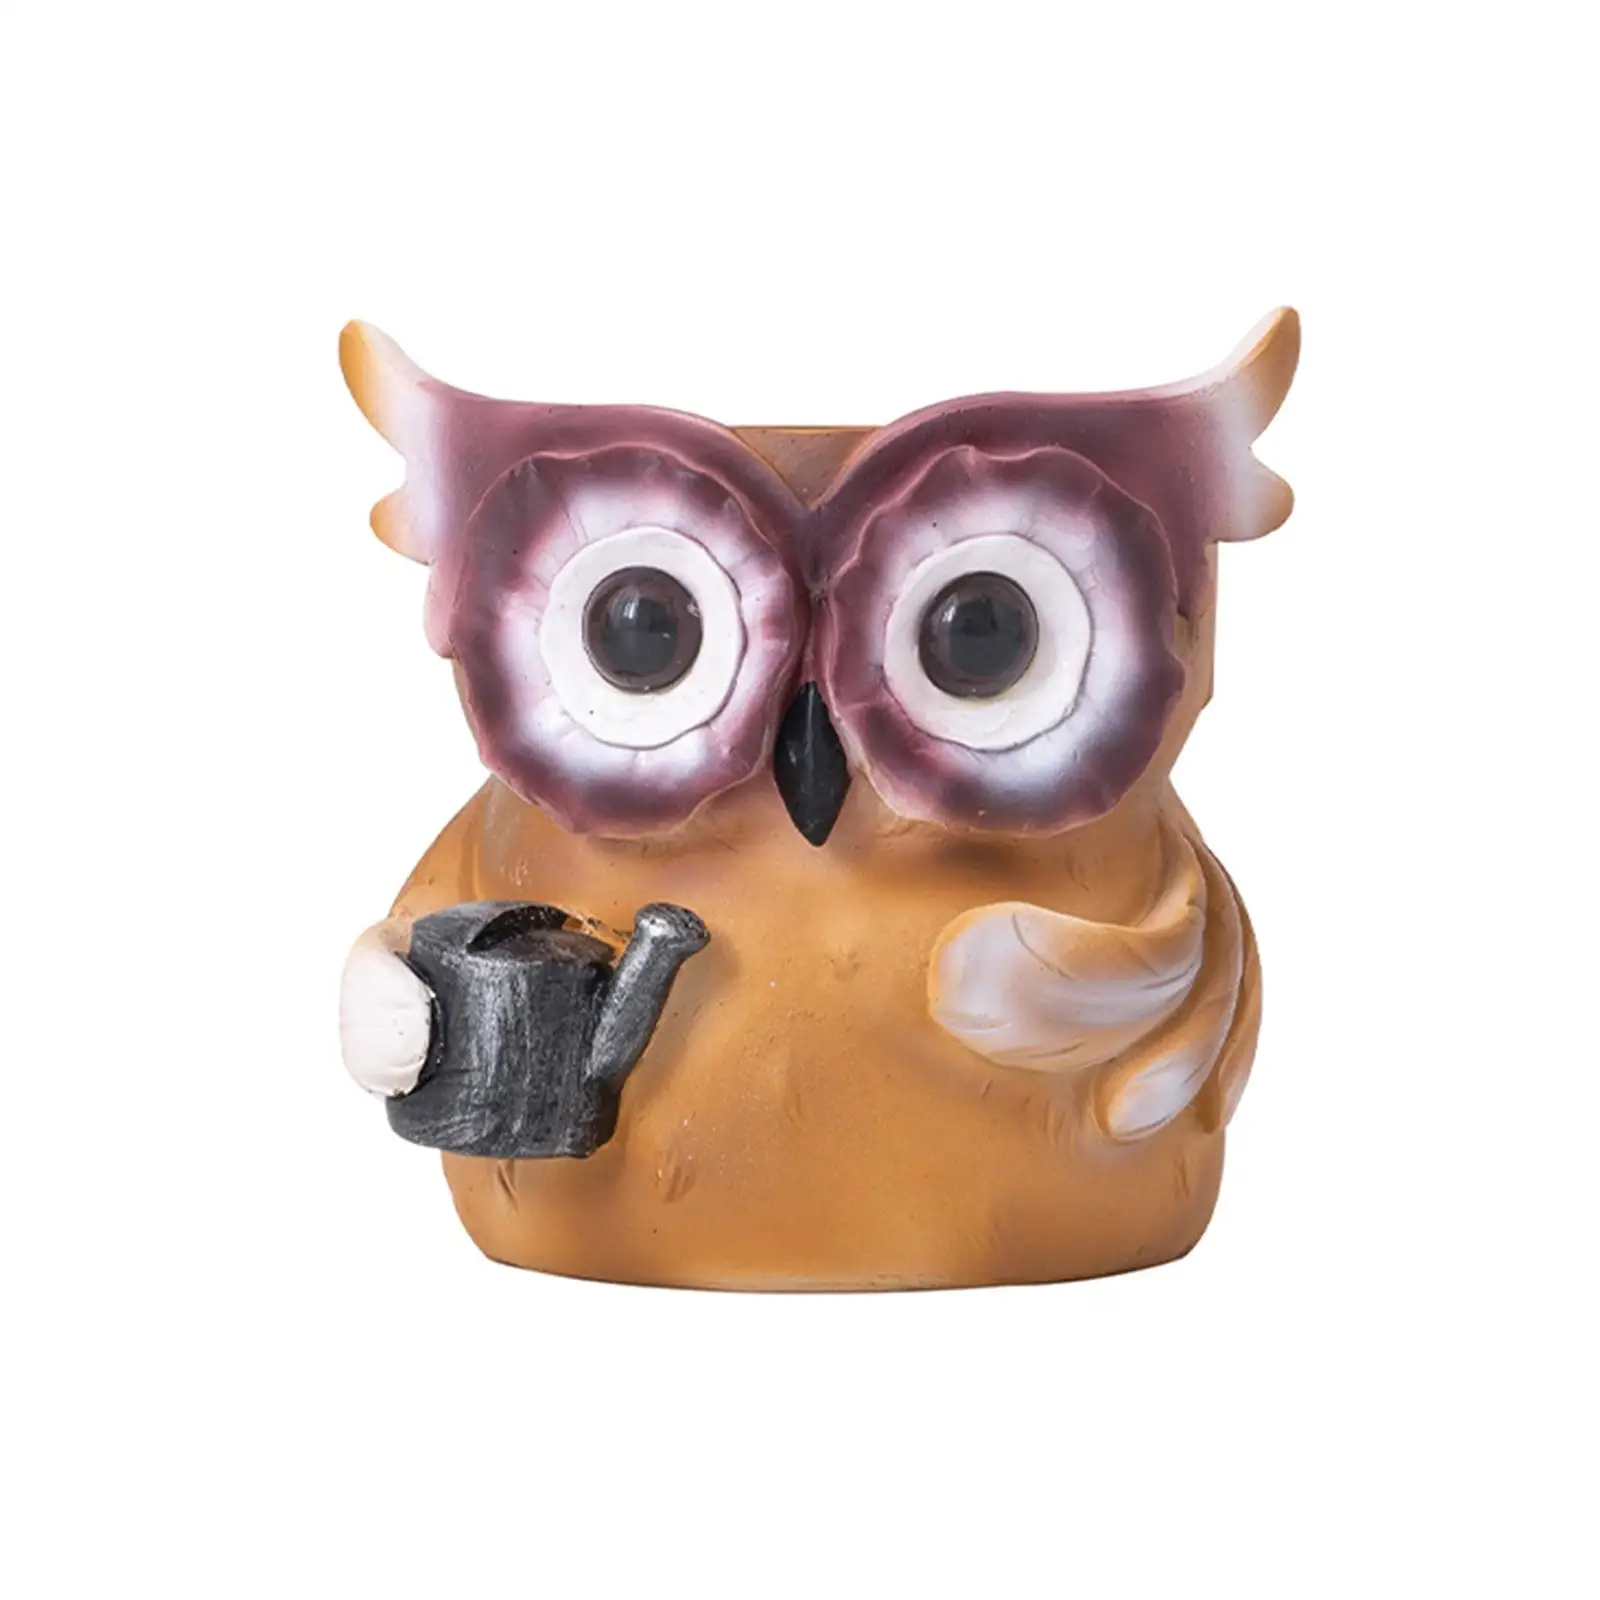 Owl Flower Pot Statue Cute Art Ornament Creative Owl Flower Pot Figurine for Office Table Cabinet Entry Home Decor Accents